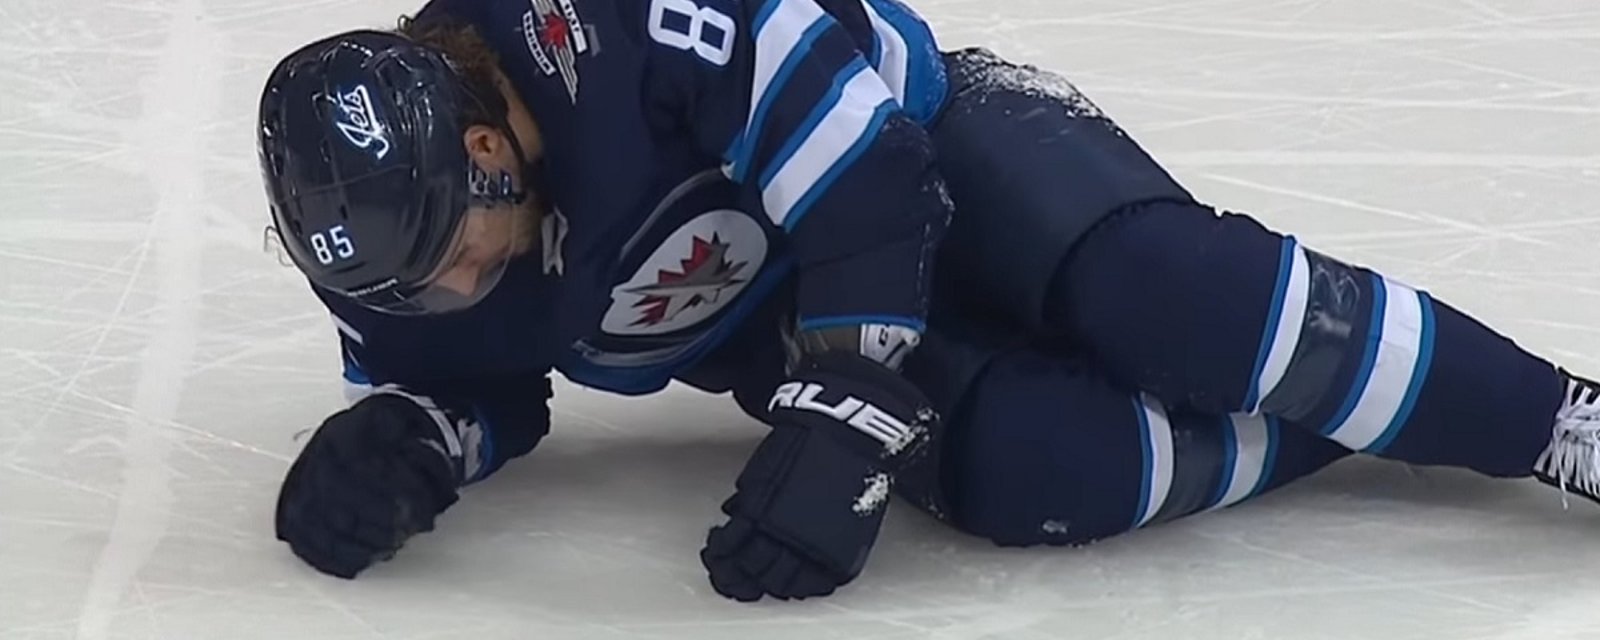 Mathieu Perreault gets crushed by a massive open ice hit from Dale Weise.